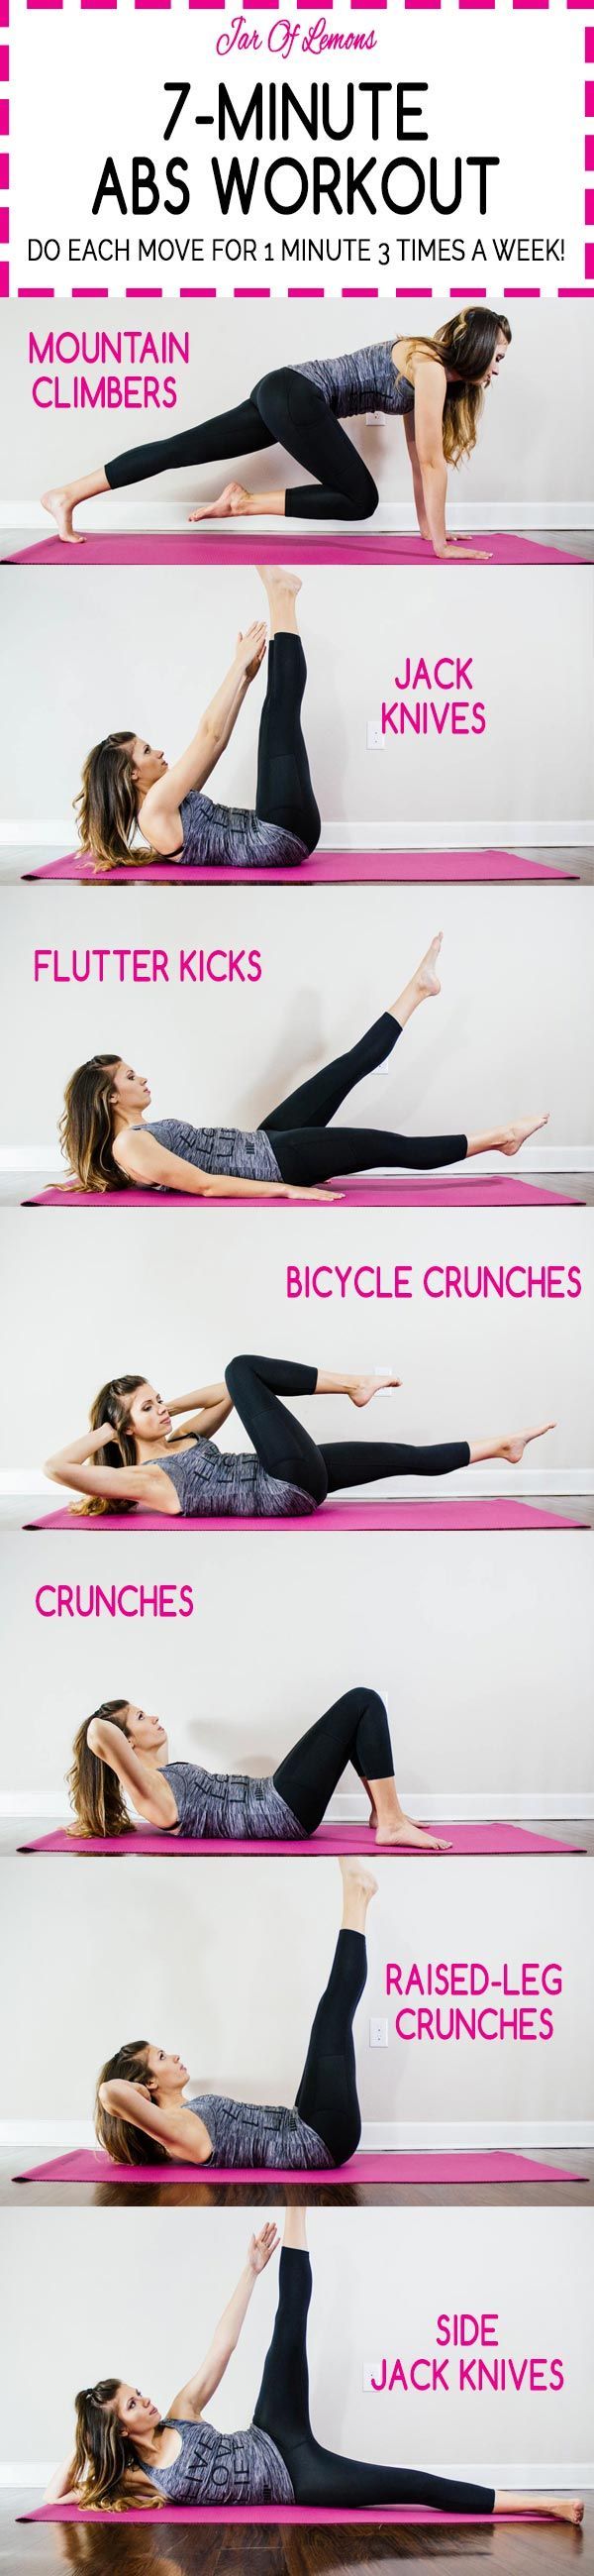 7-Minute Abs Workout! Do each move for 1 minute. 7 minutes, just 3 times a week!